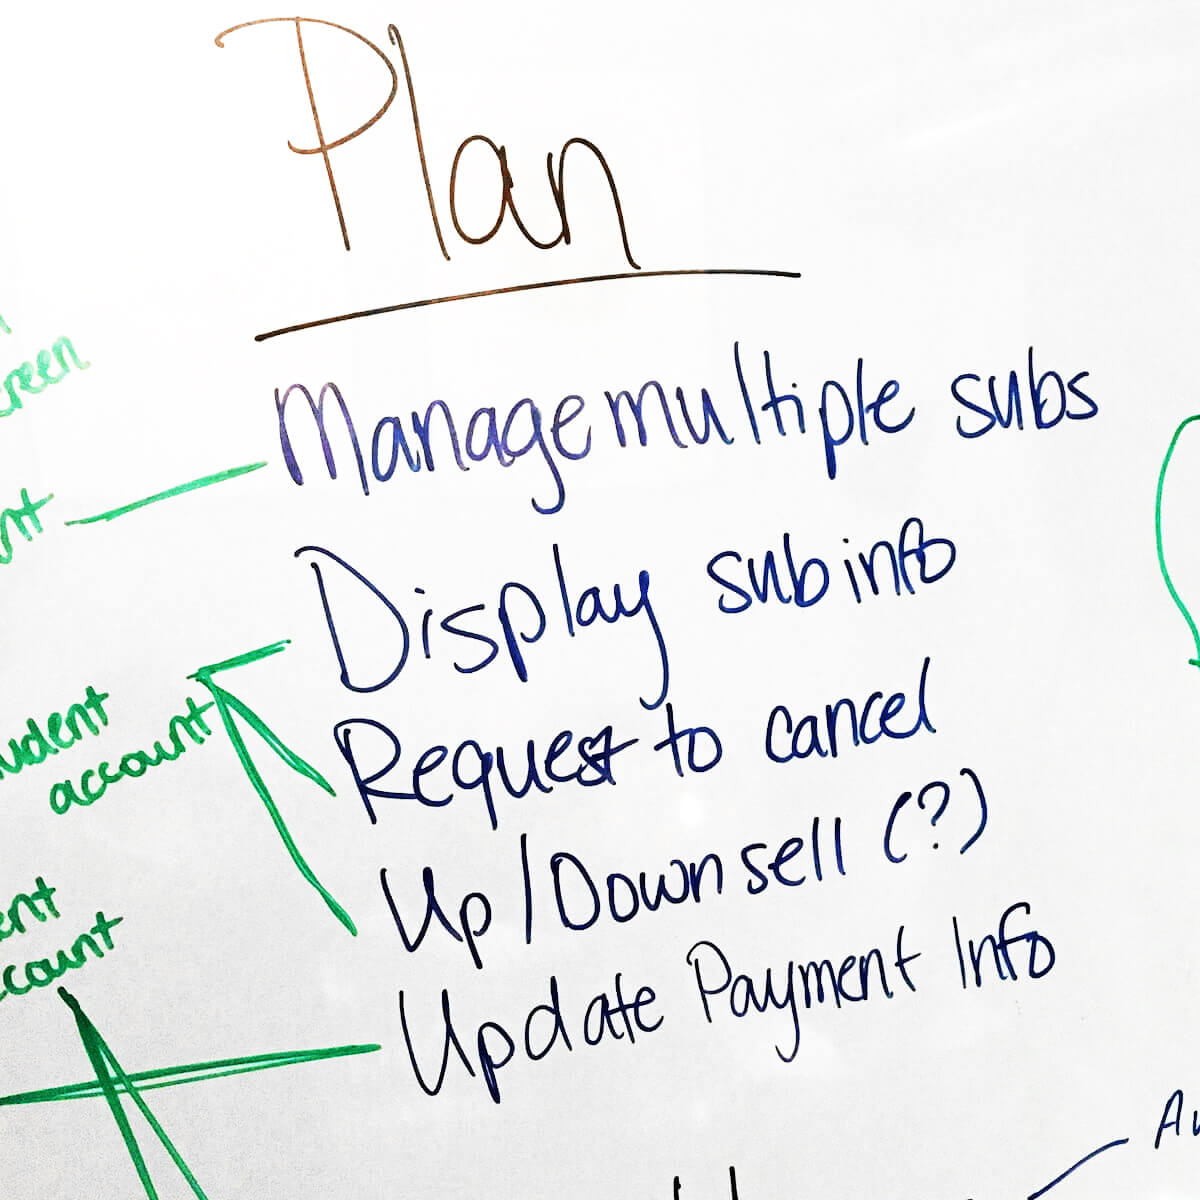 Plan requirements